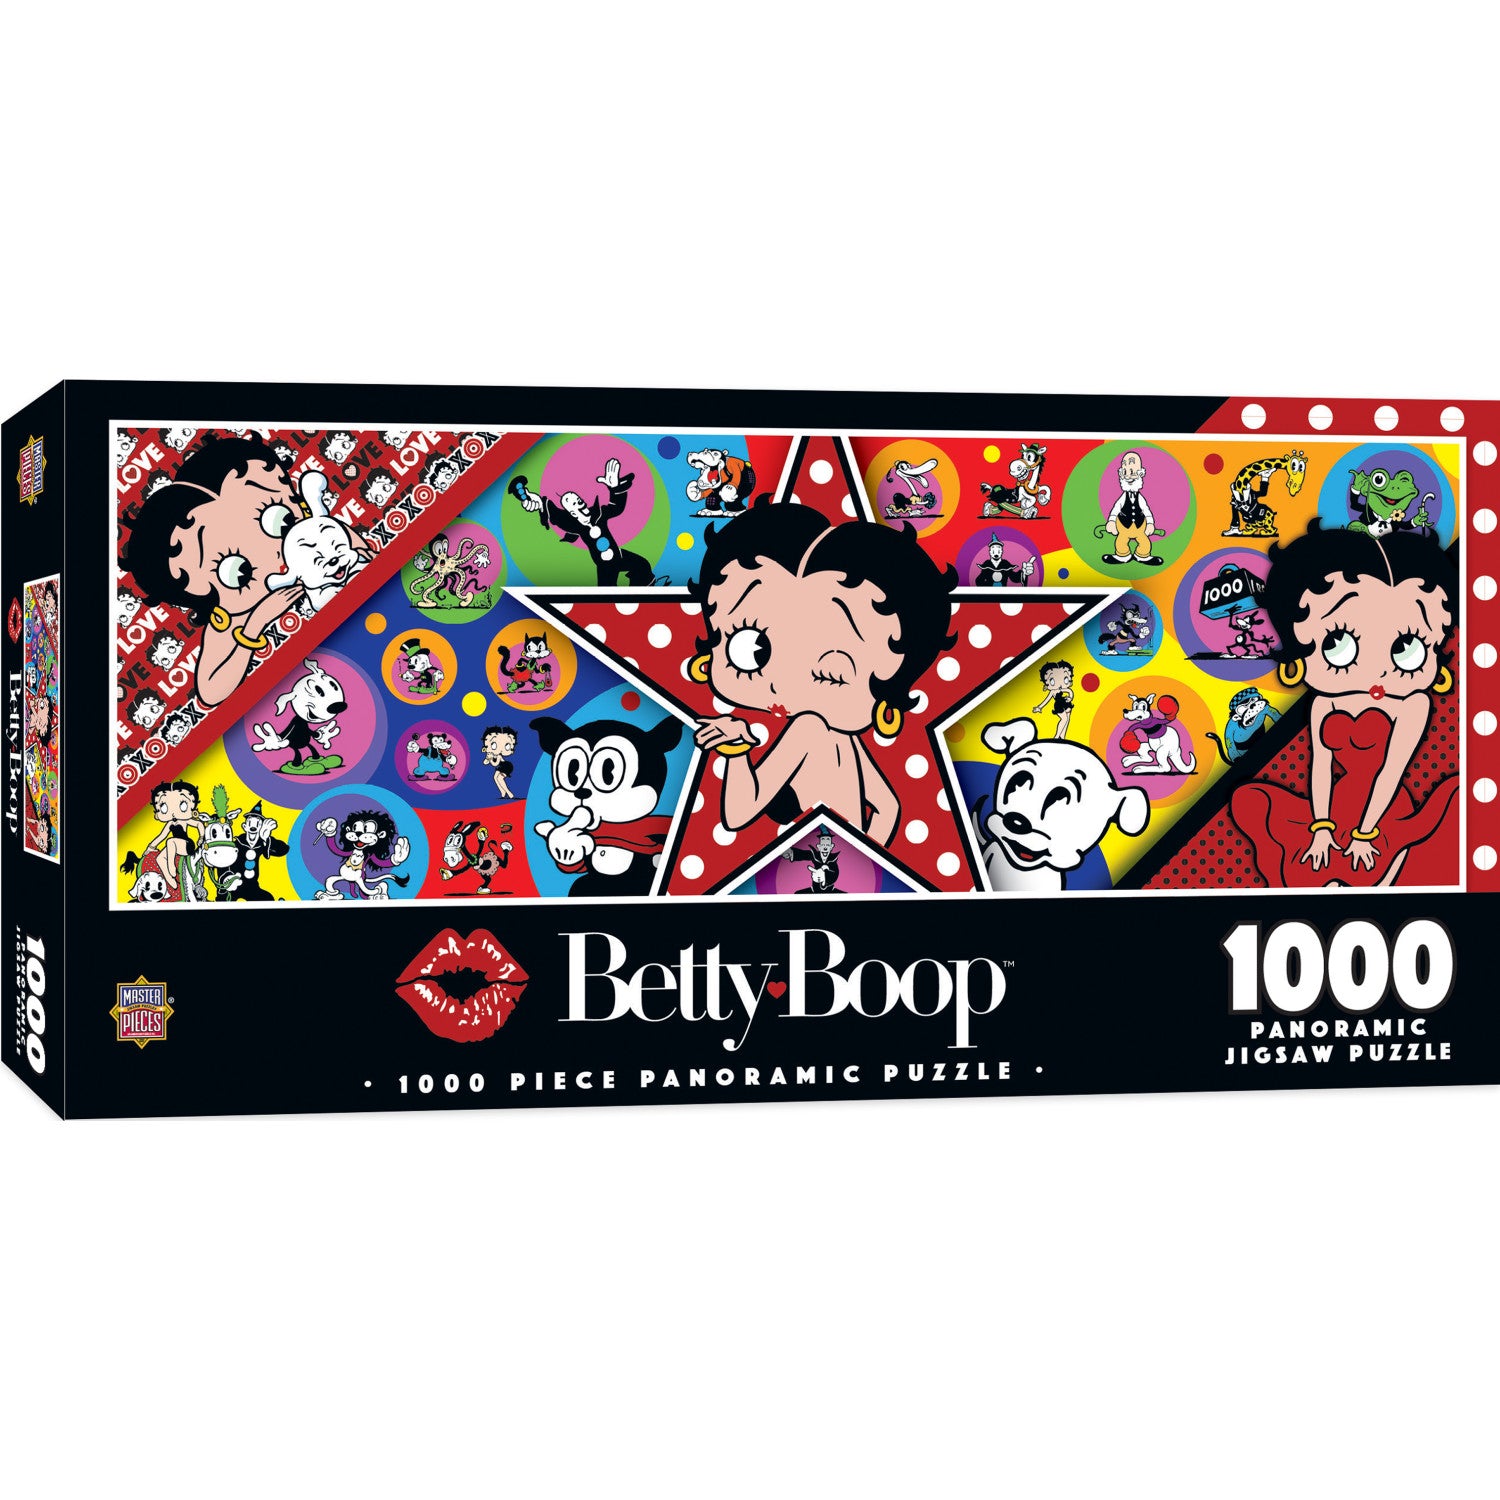 Betty Boop - 1000 Piece Panoramic Jigsaw Puzzle